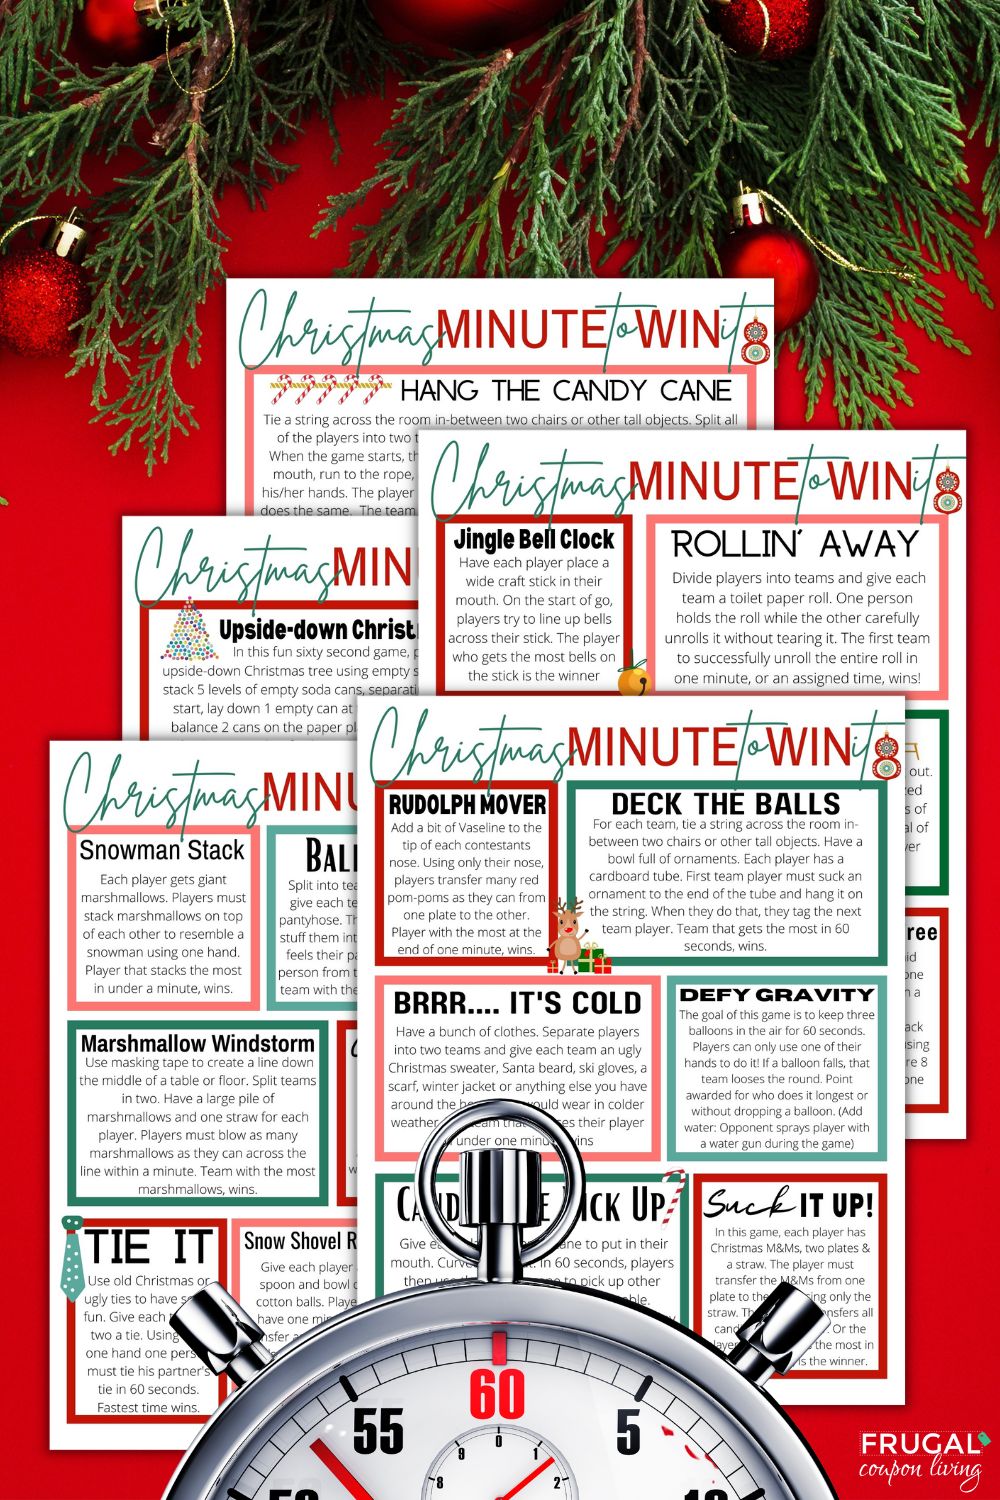 25 Minute to win it games printable PDF